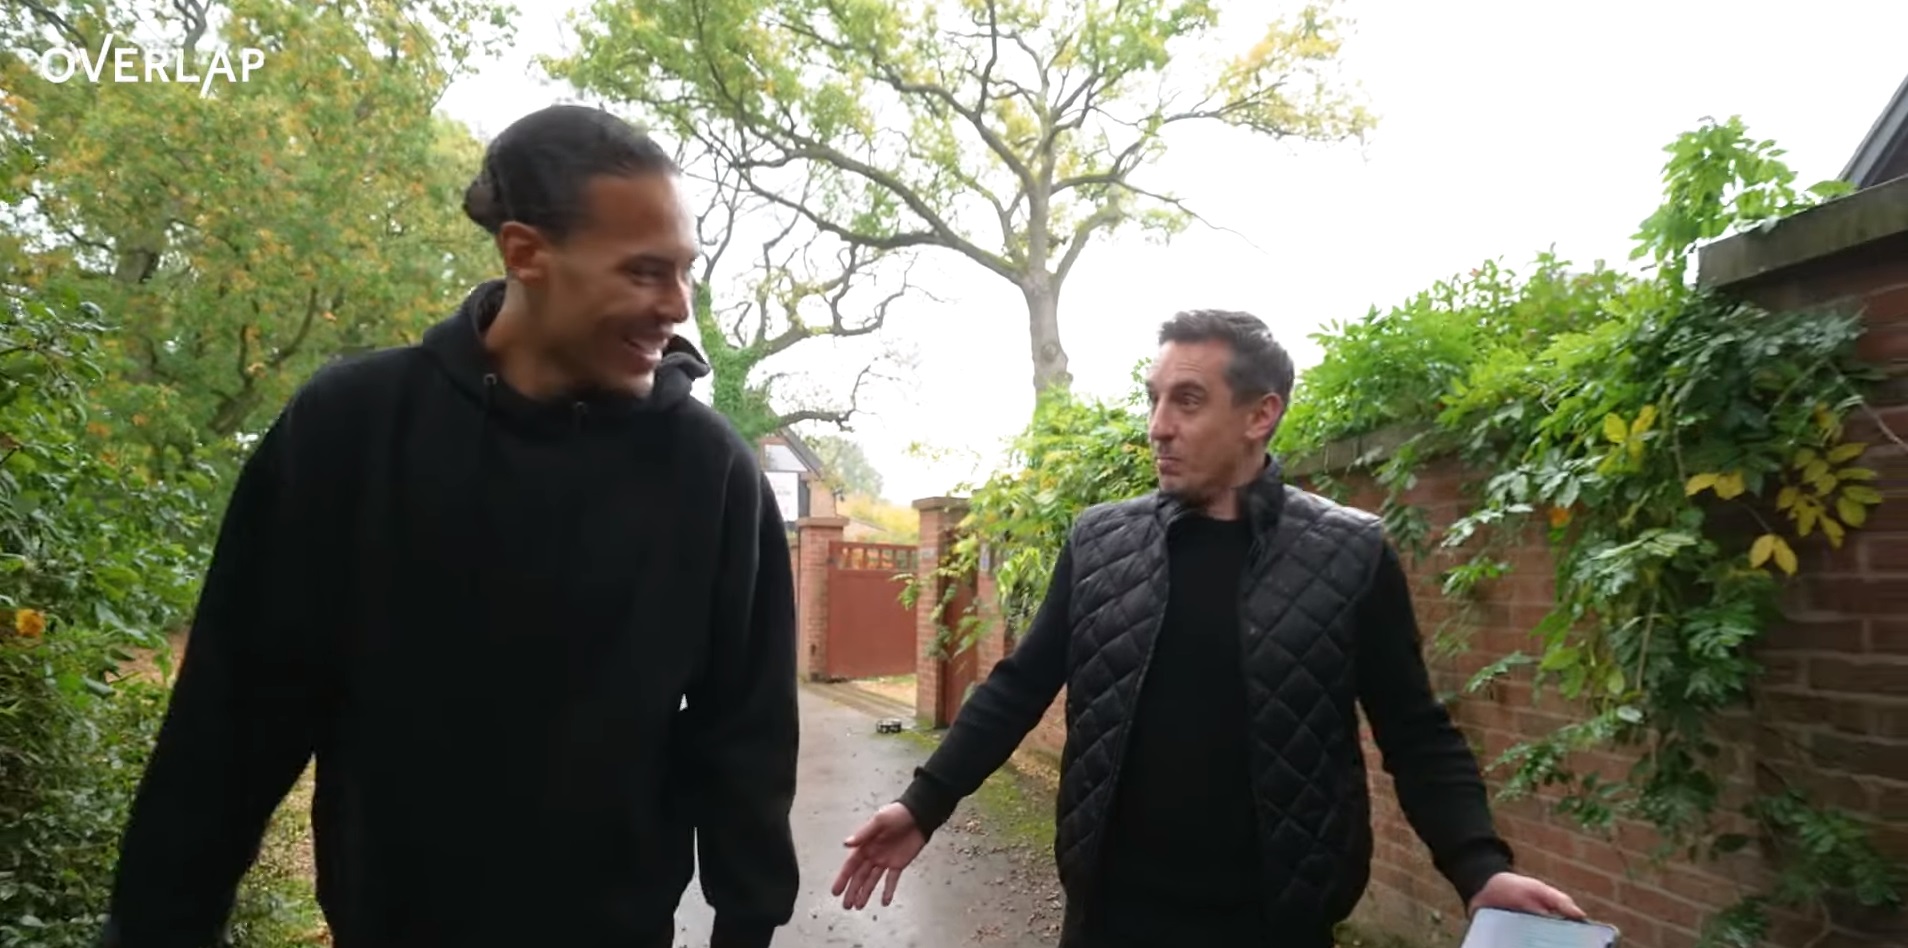 (Video) “No you don’t!” – Gary Neville can’t believe celebrity number Van Dijk has on his phone